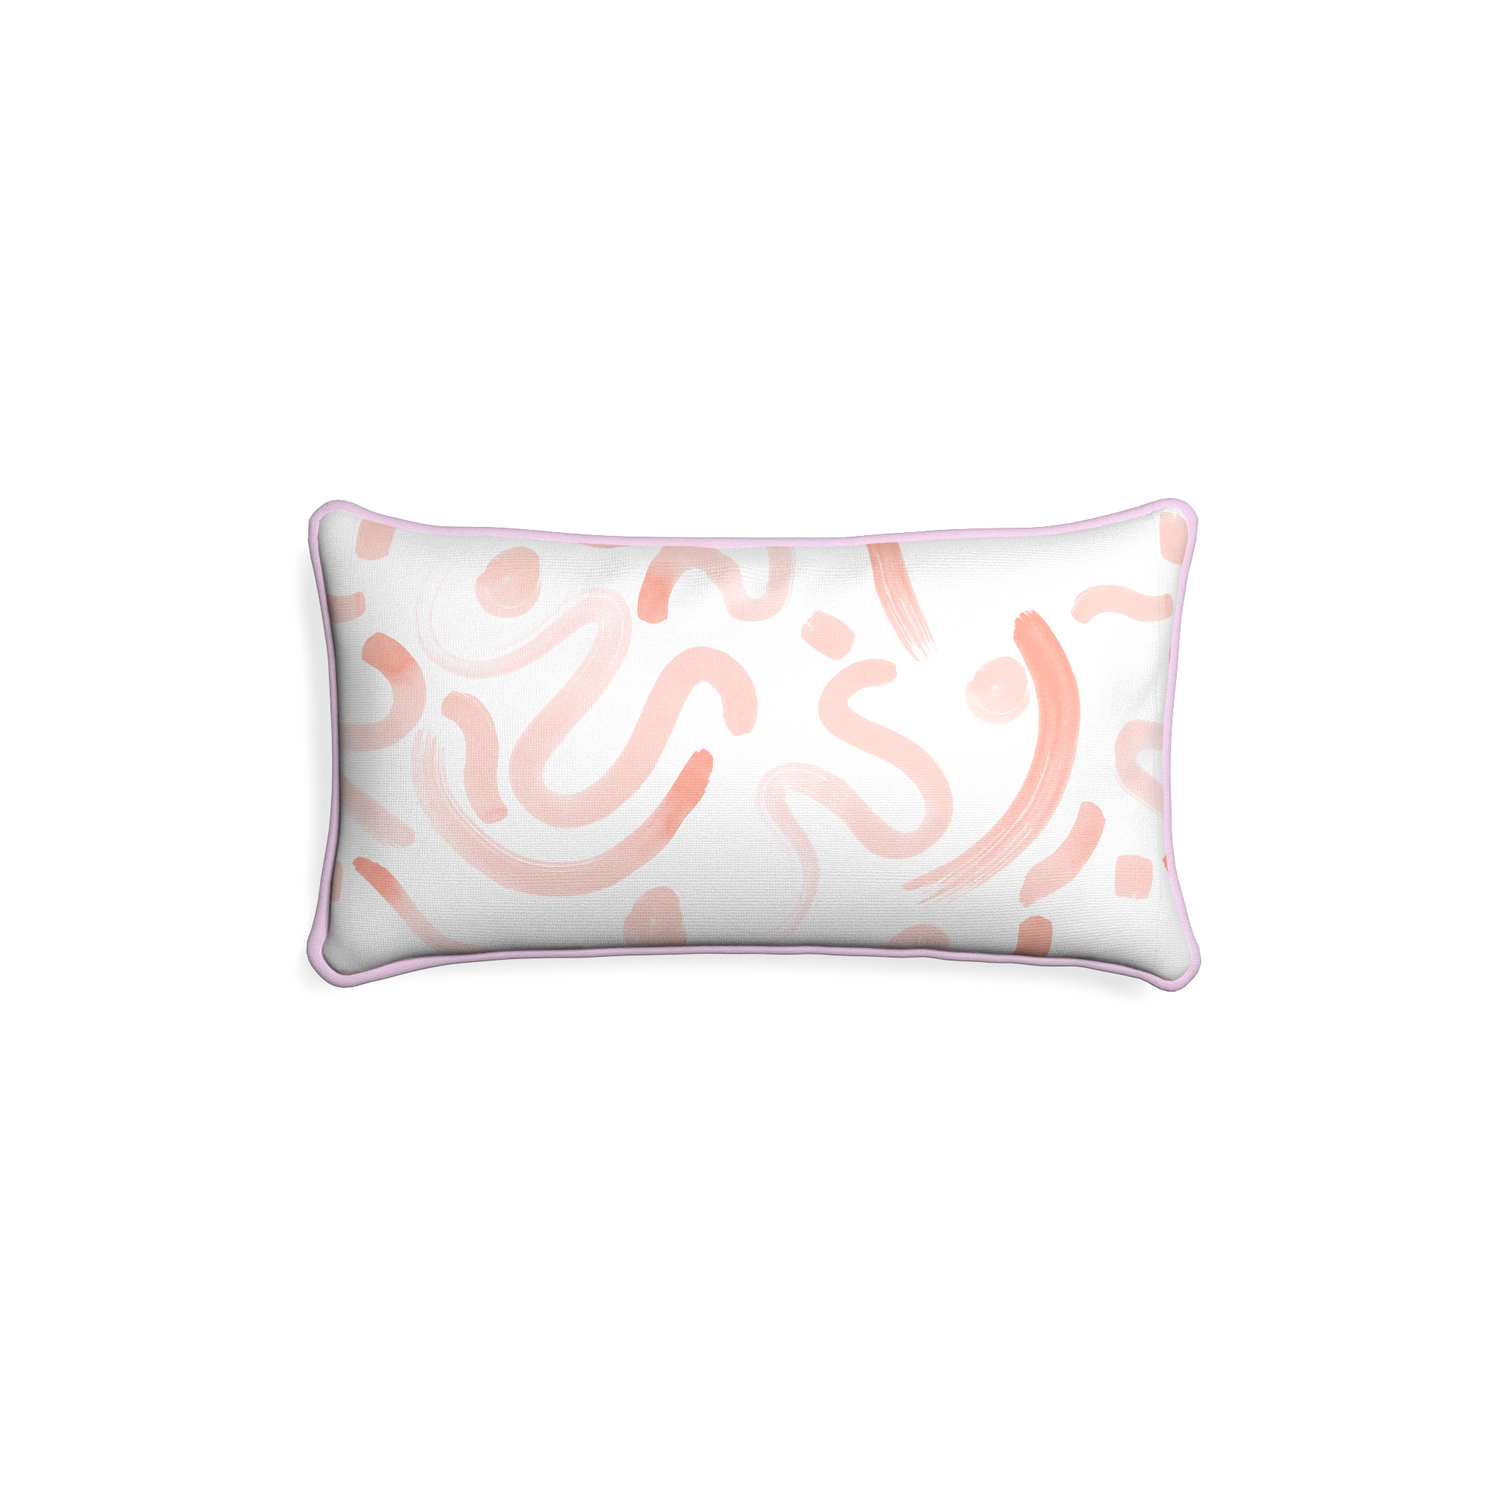 Petite-lumbar hockney pink custom pink graphicpillow with l piping on white background